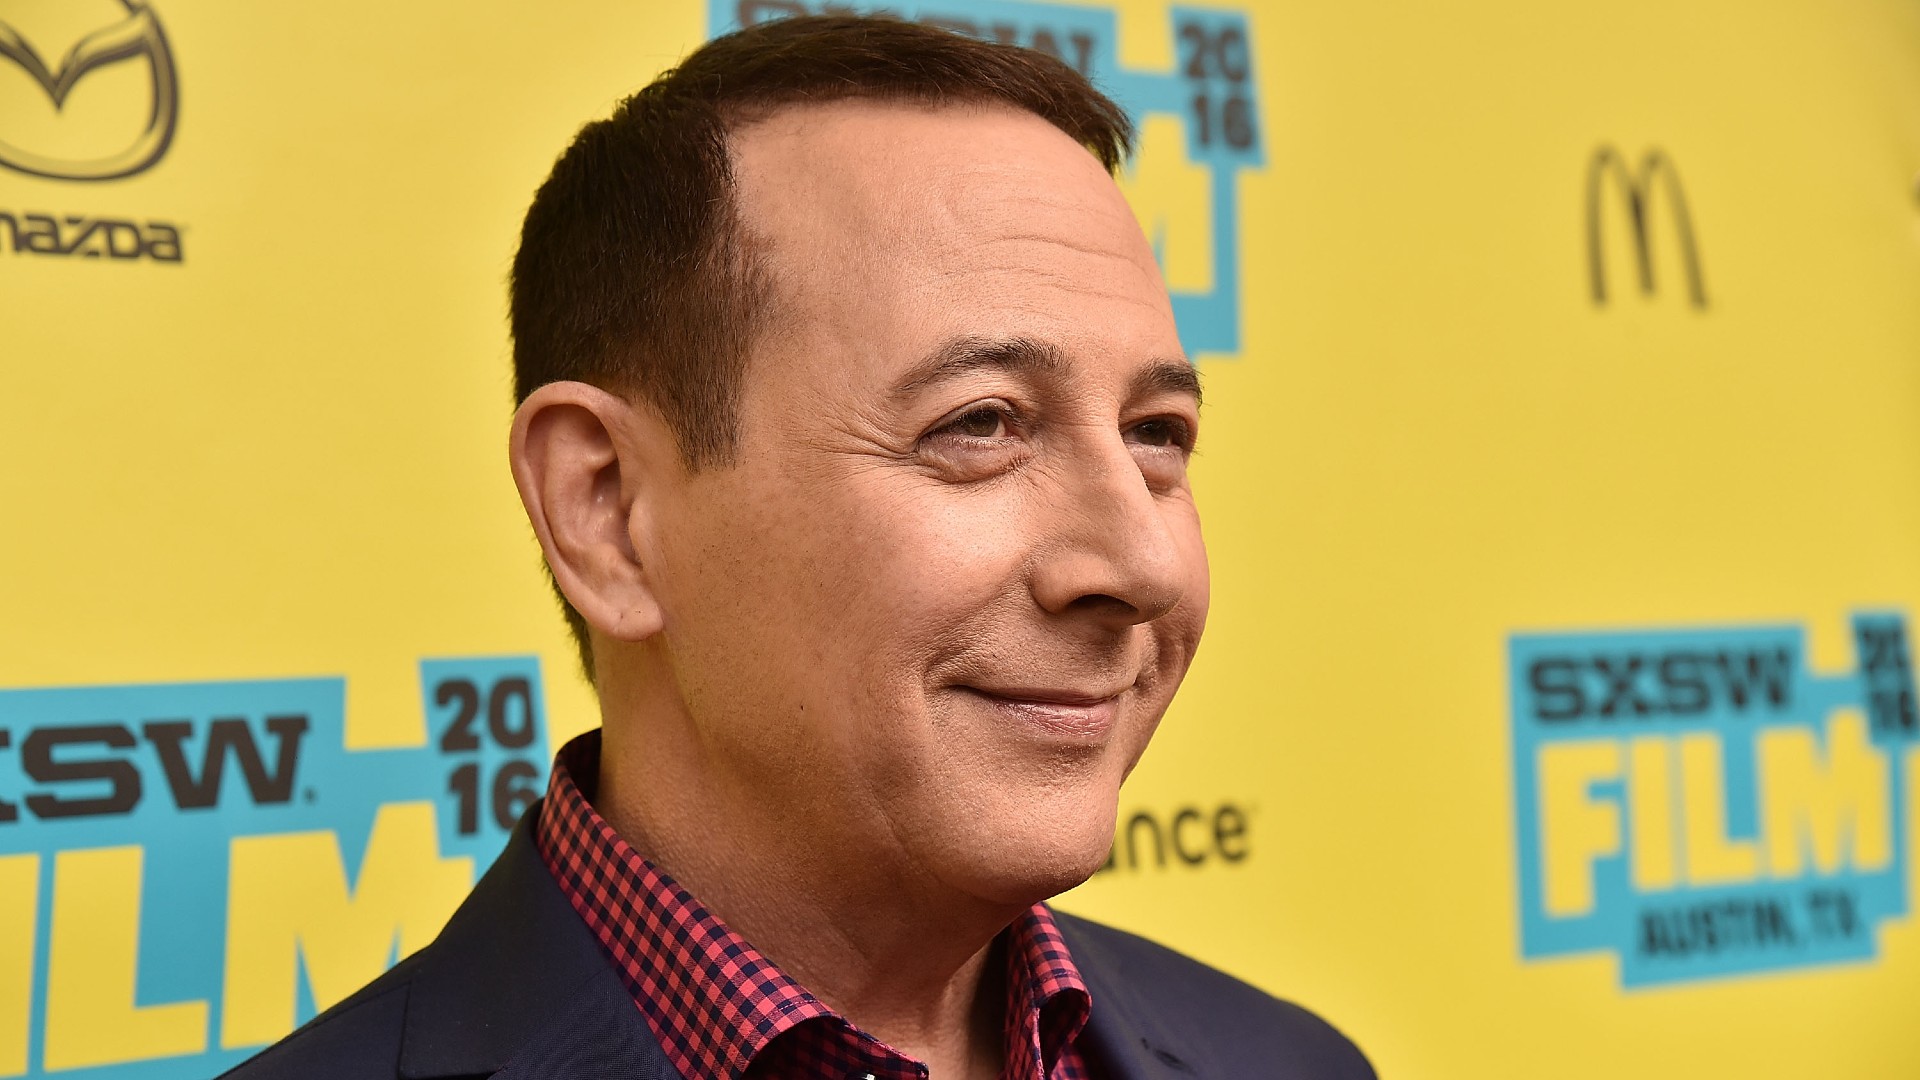 Paul Reubens, known for playing Pee-Wee Herman, passes away at 70.